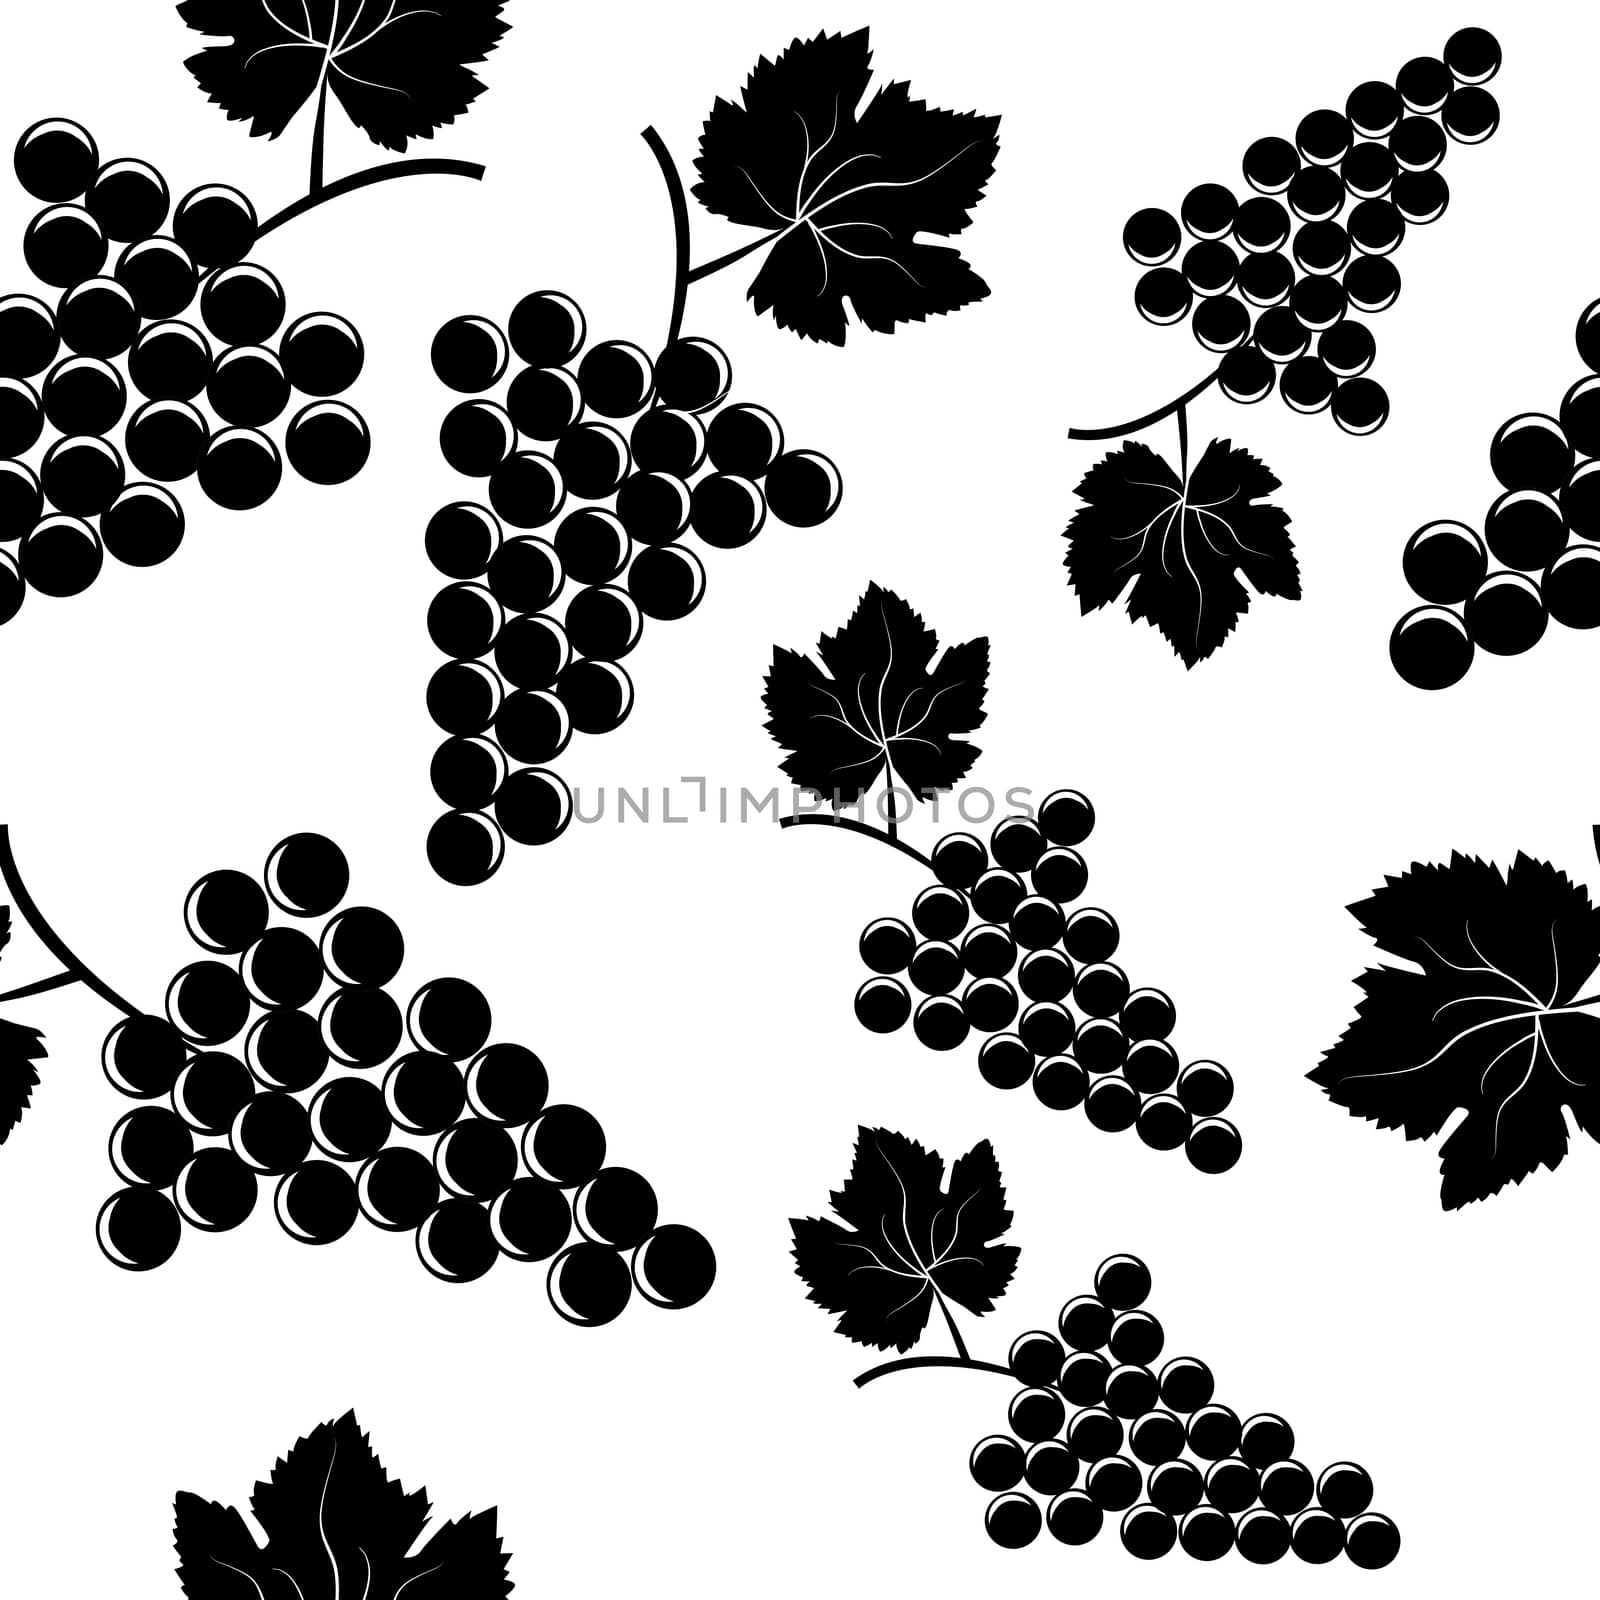 Background with grapes